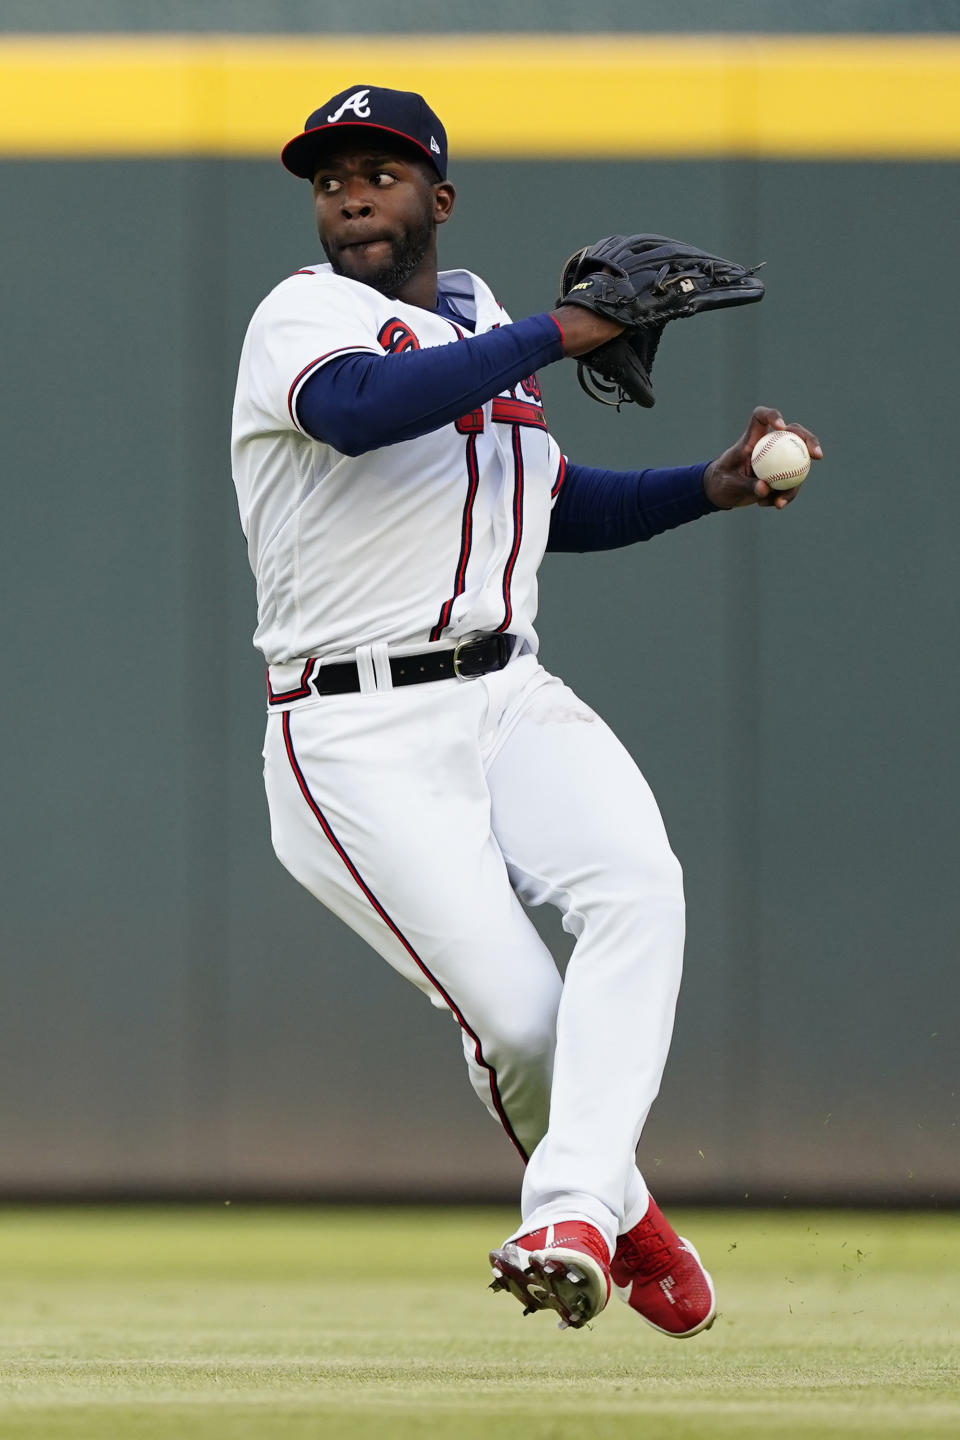 Atlanta Braves center fielder Guillermo Heredia throws after fielding a ball hit for a single by Washington Nationals' Josh Harrison in the first inning of a baseball game Tuesday, June 1, 2021, in Atlanta. (AP Photo/John Bazemore)